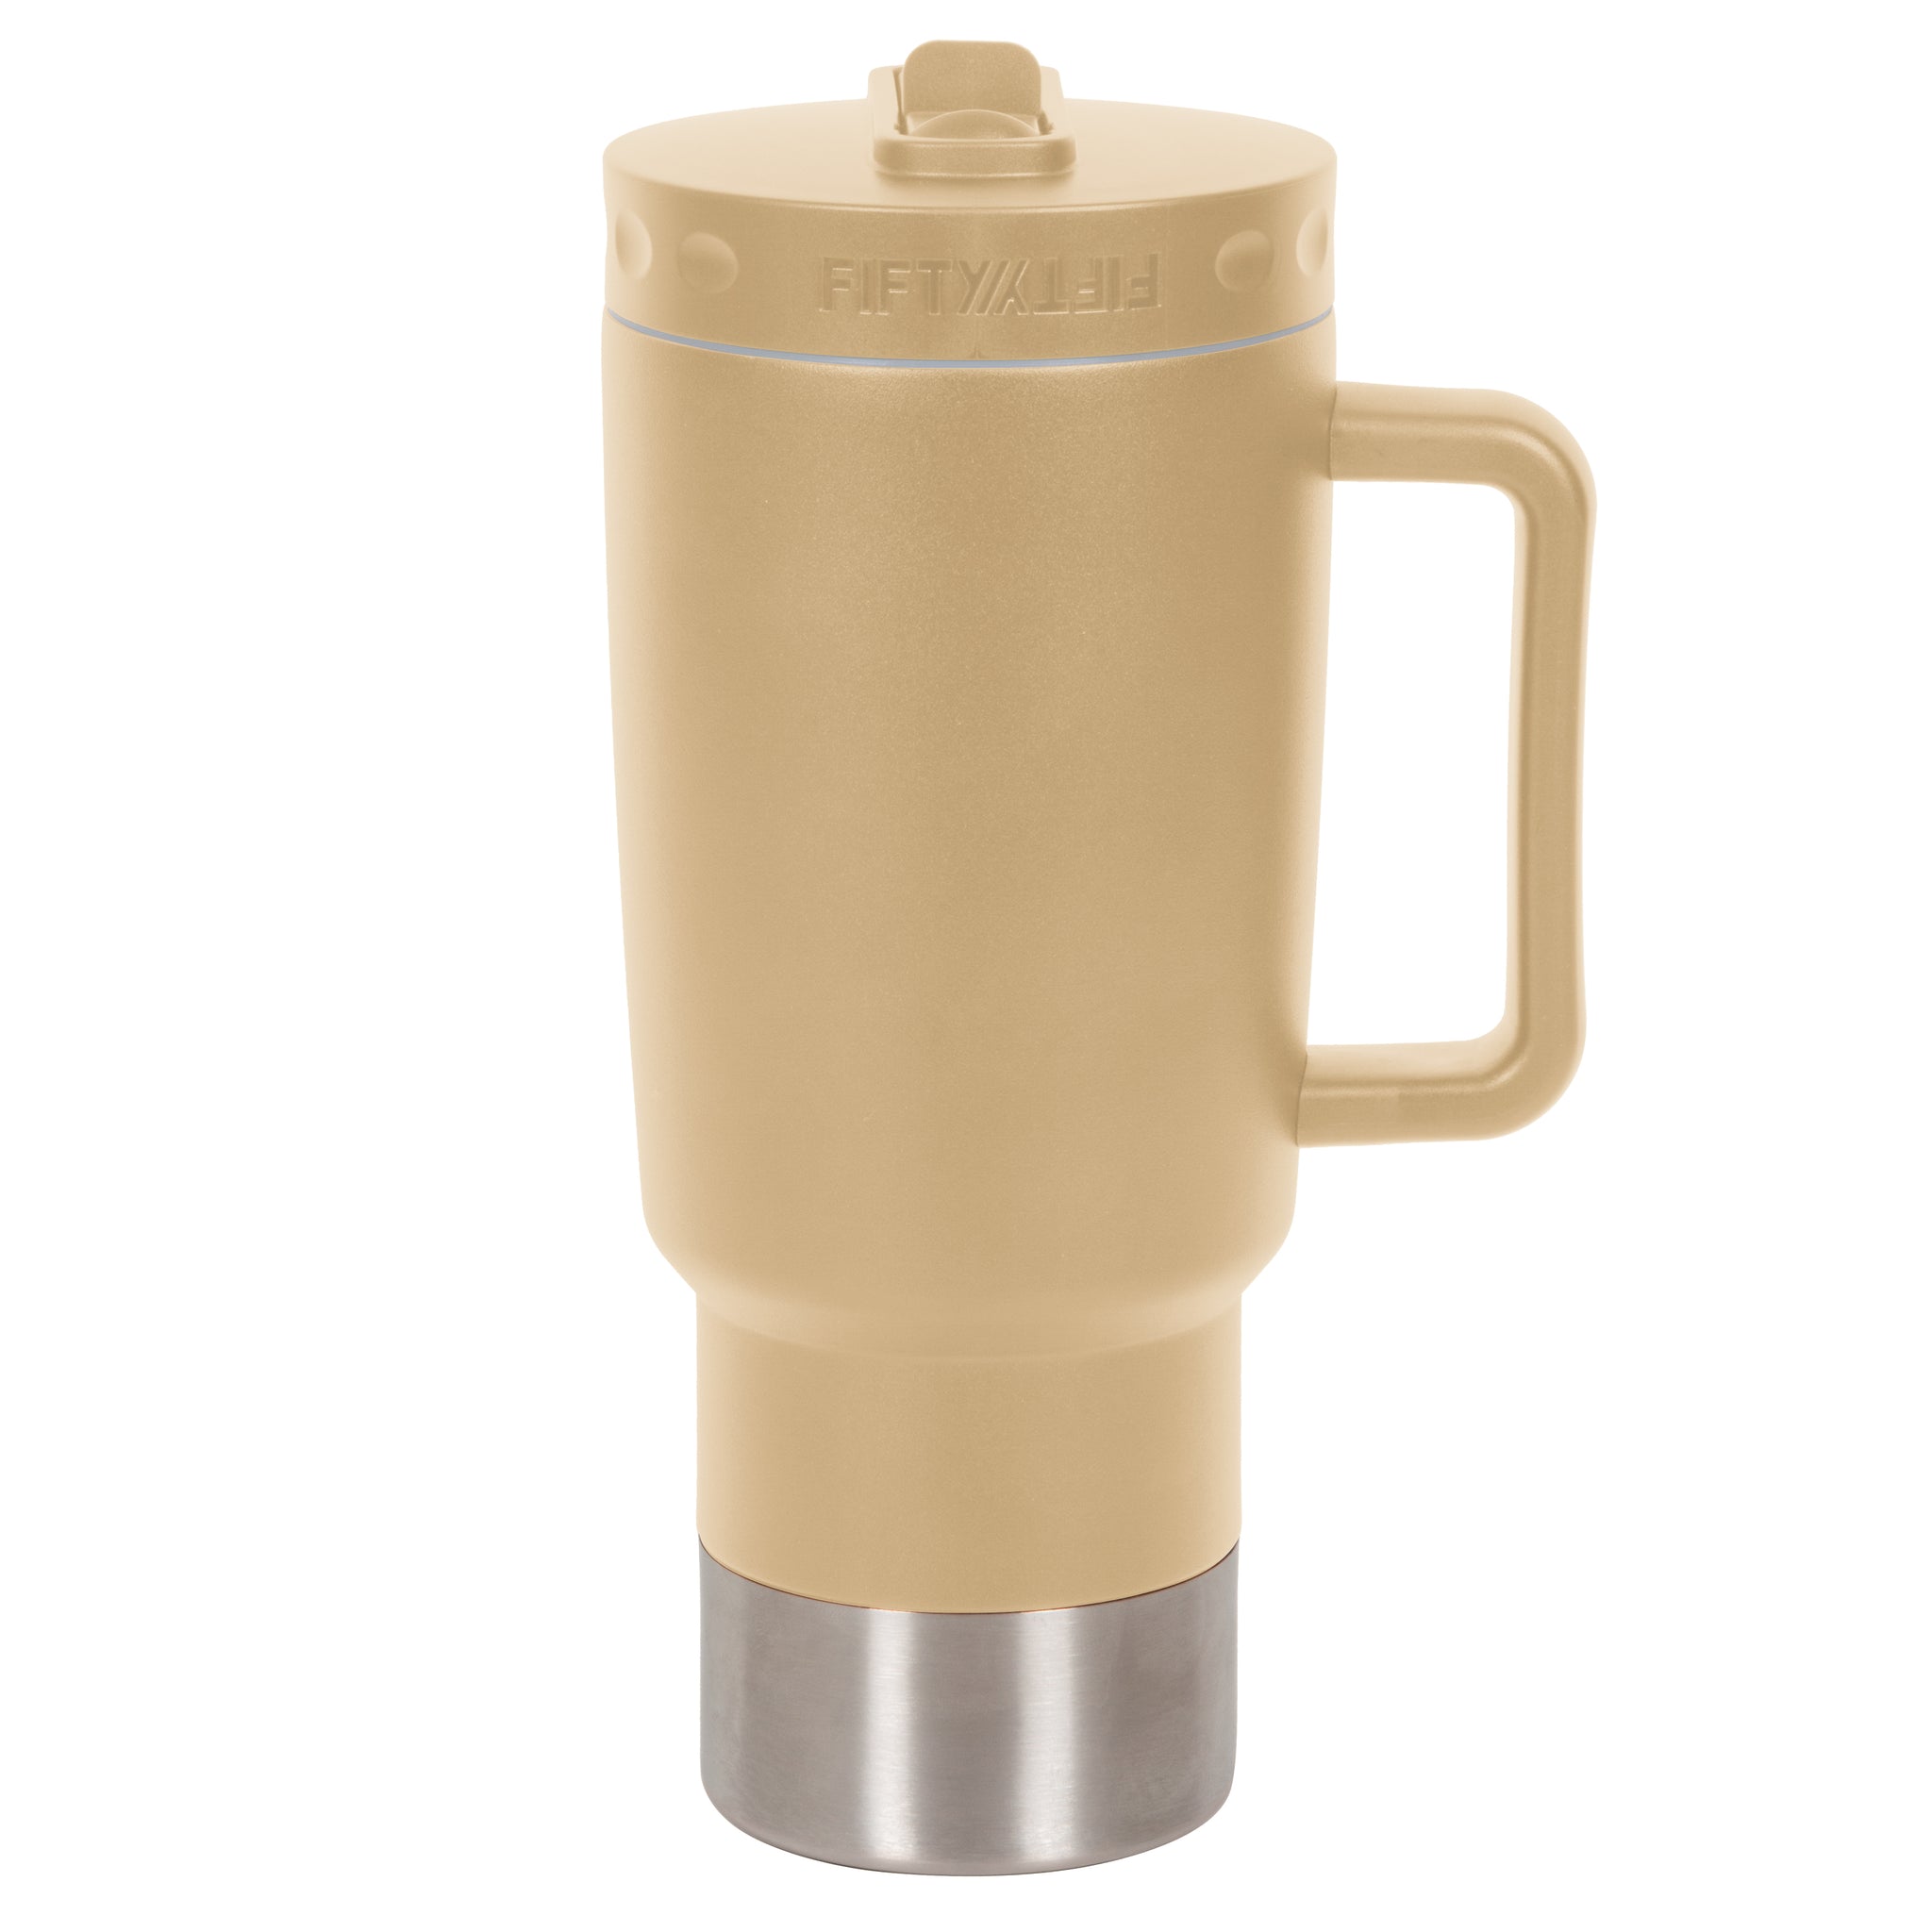 Original Stanley 40oz Tumbler With Handle With Straw Lids